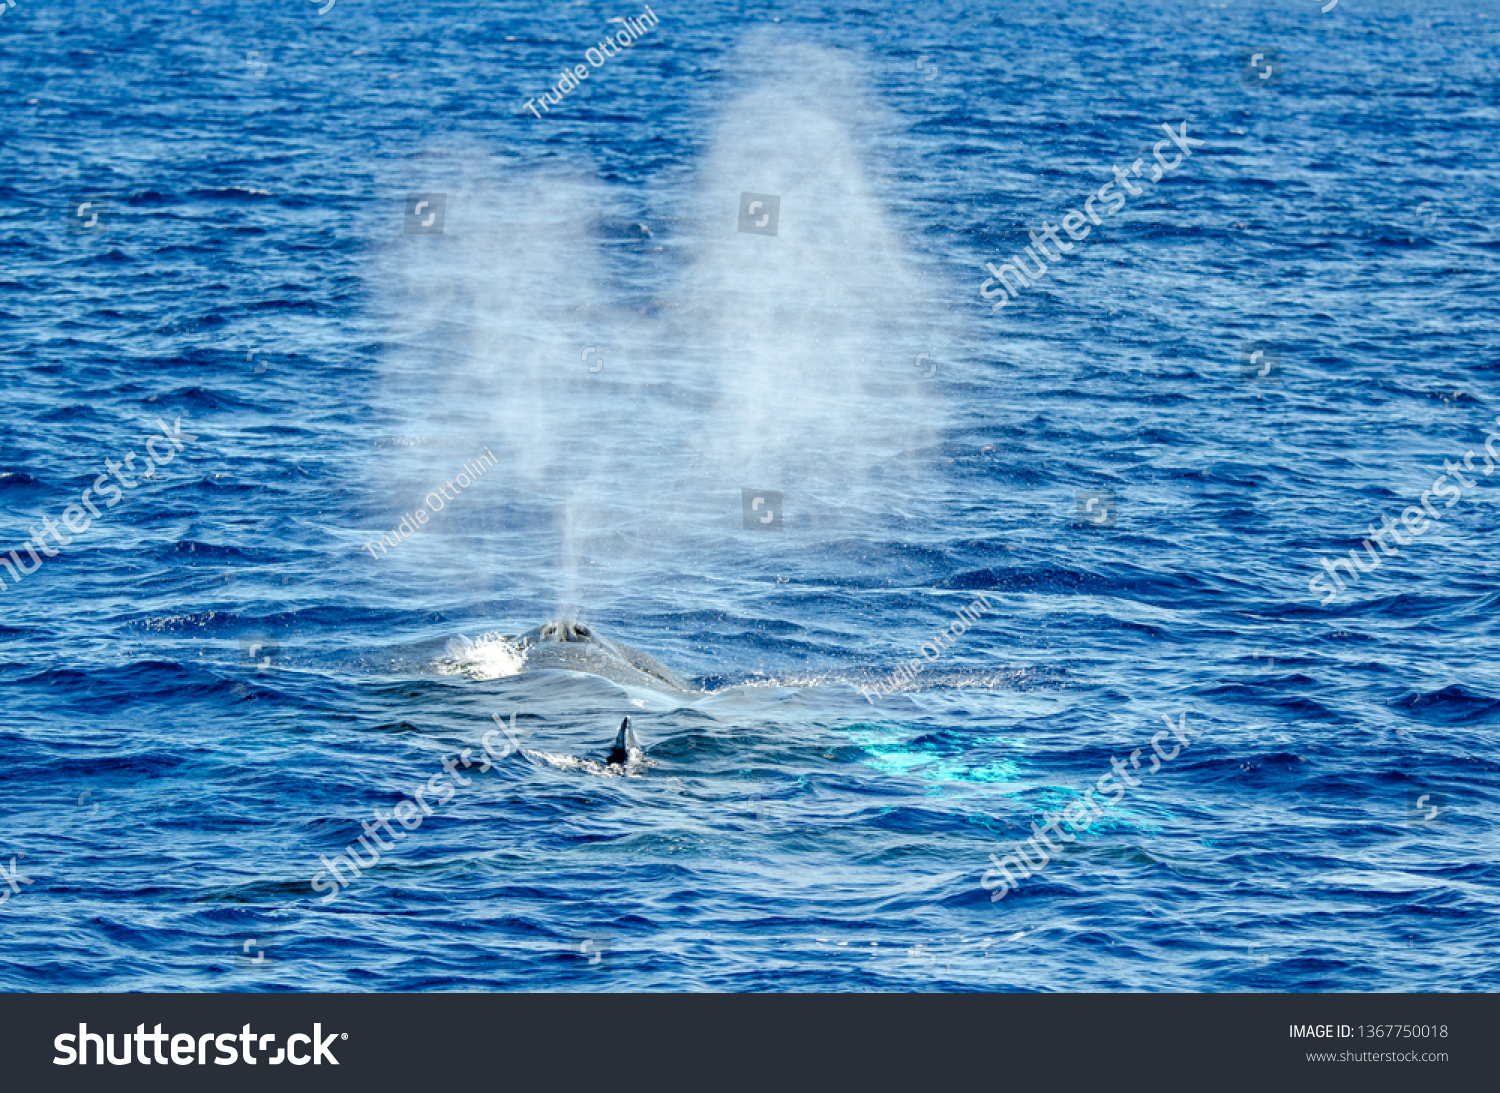 A high water spot, two part blow hole, small dorsal fin and the underwater glow of the pectoral fins.

Every year the humpback whales migrate past the island of Bermuda.  #1367750018